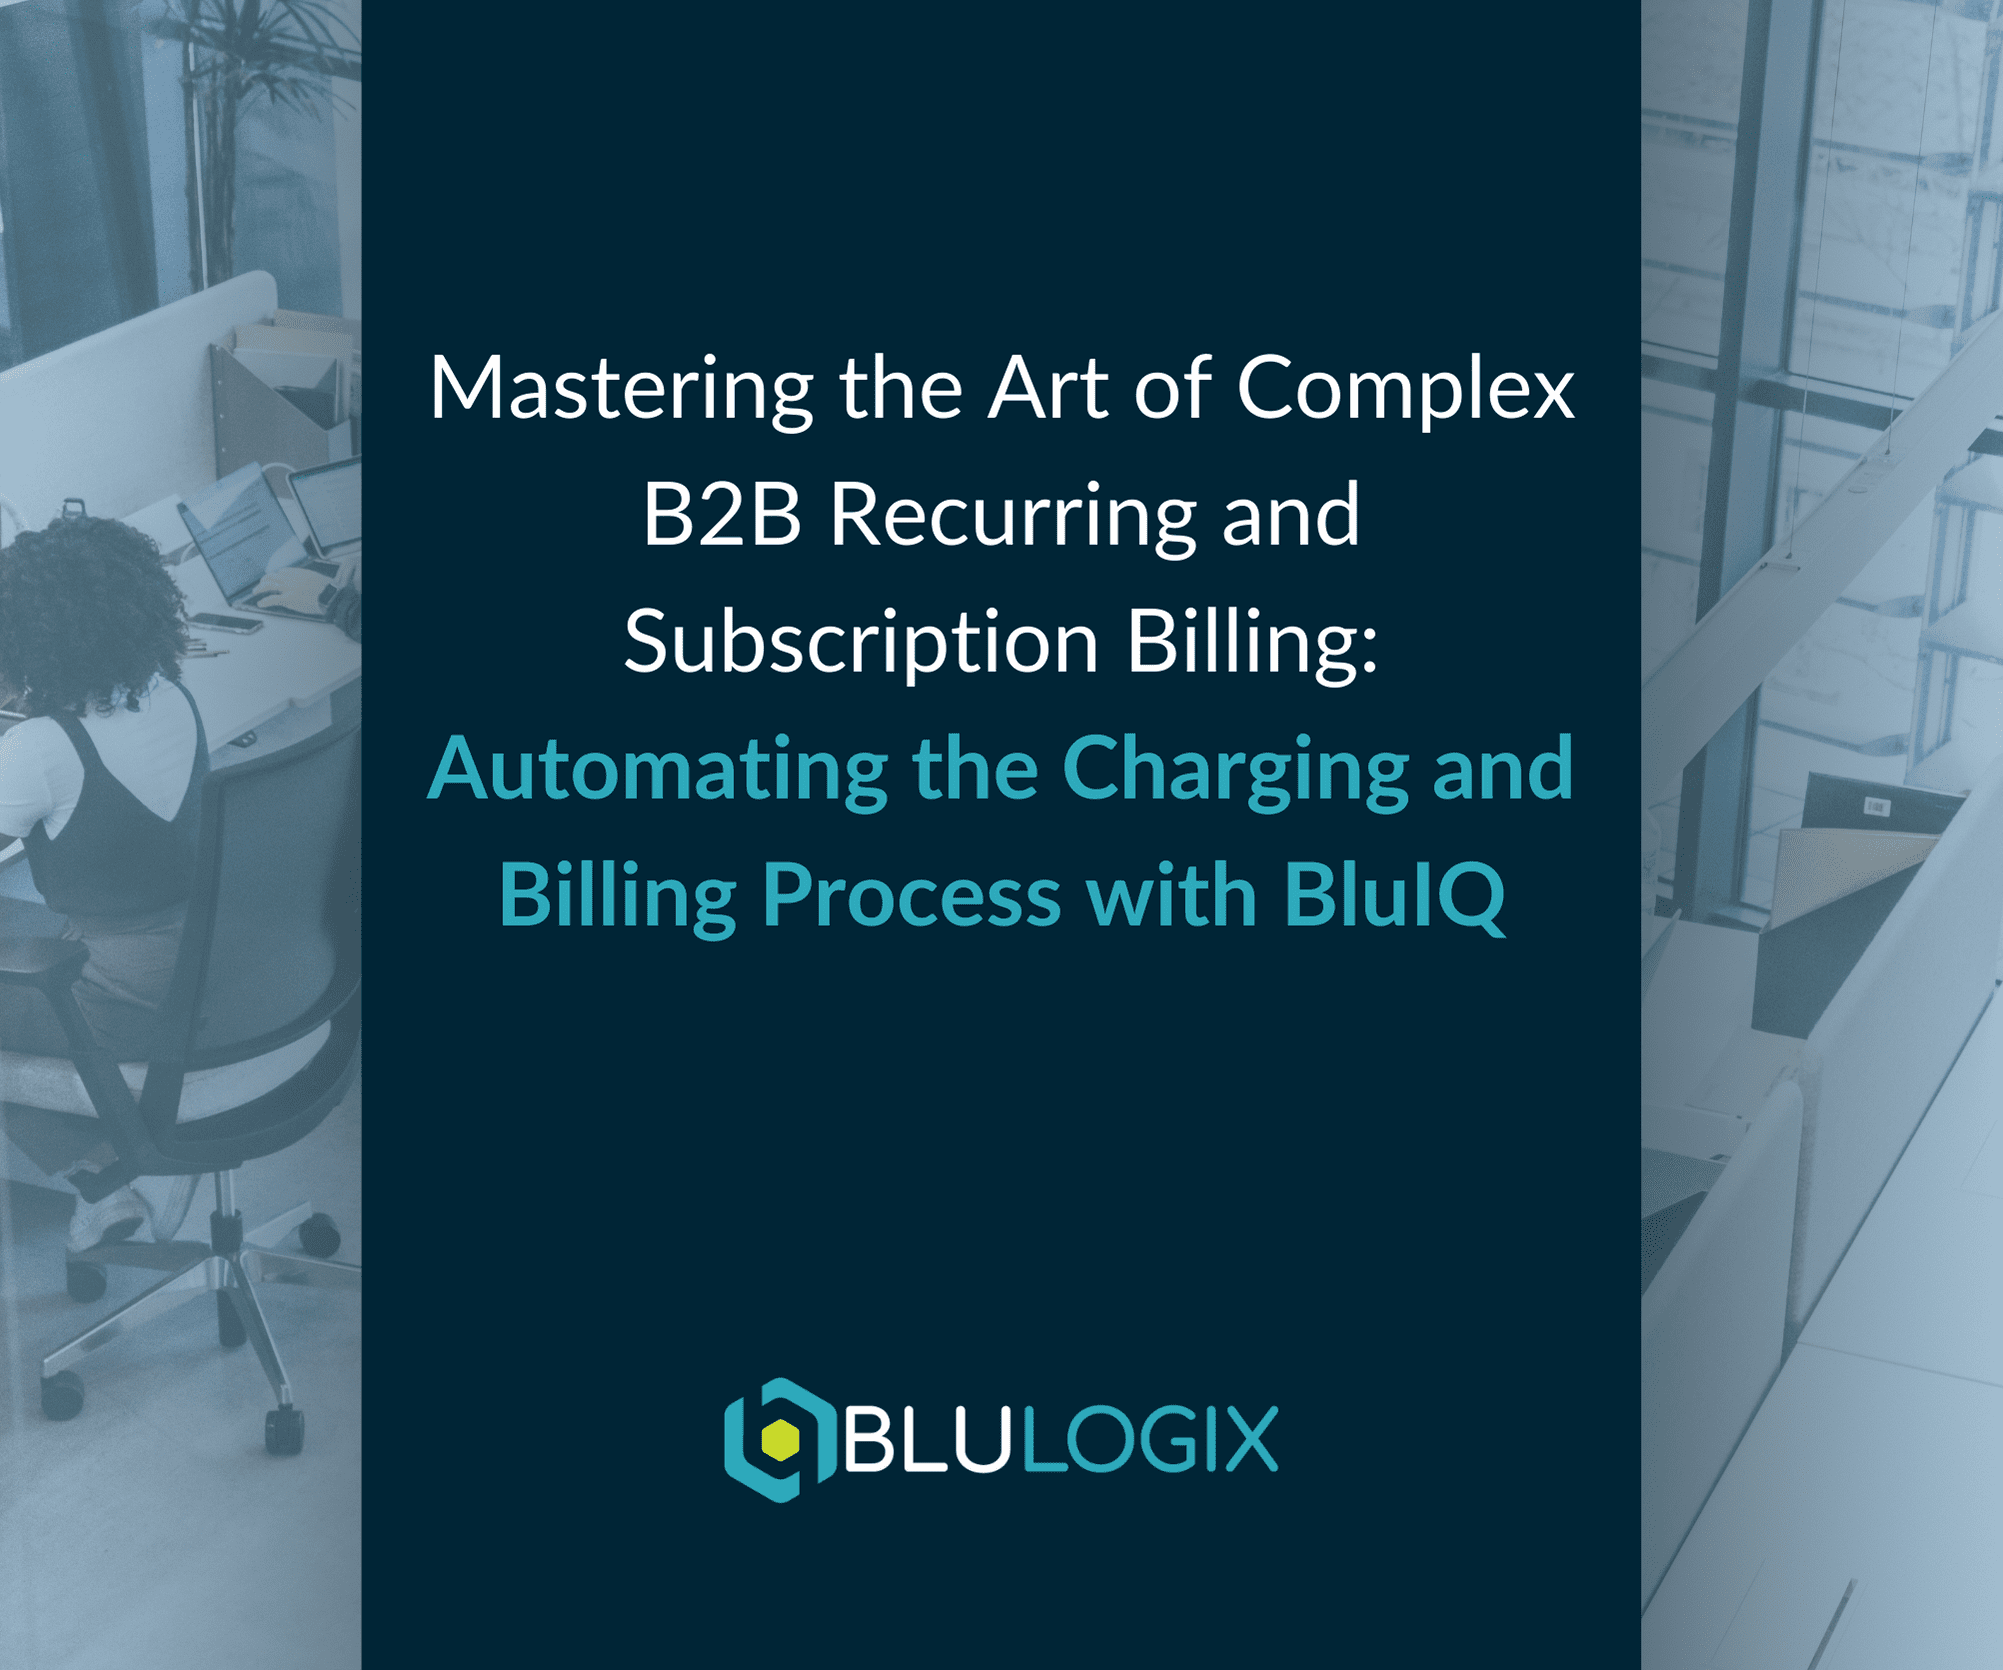 Automating the Charging and Billing Process with BluIQ